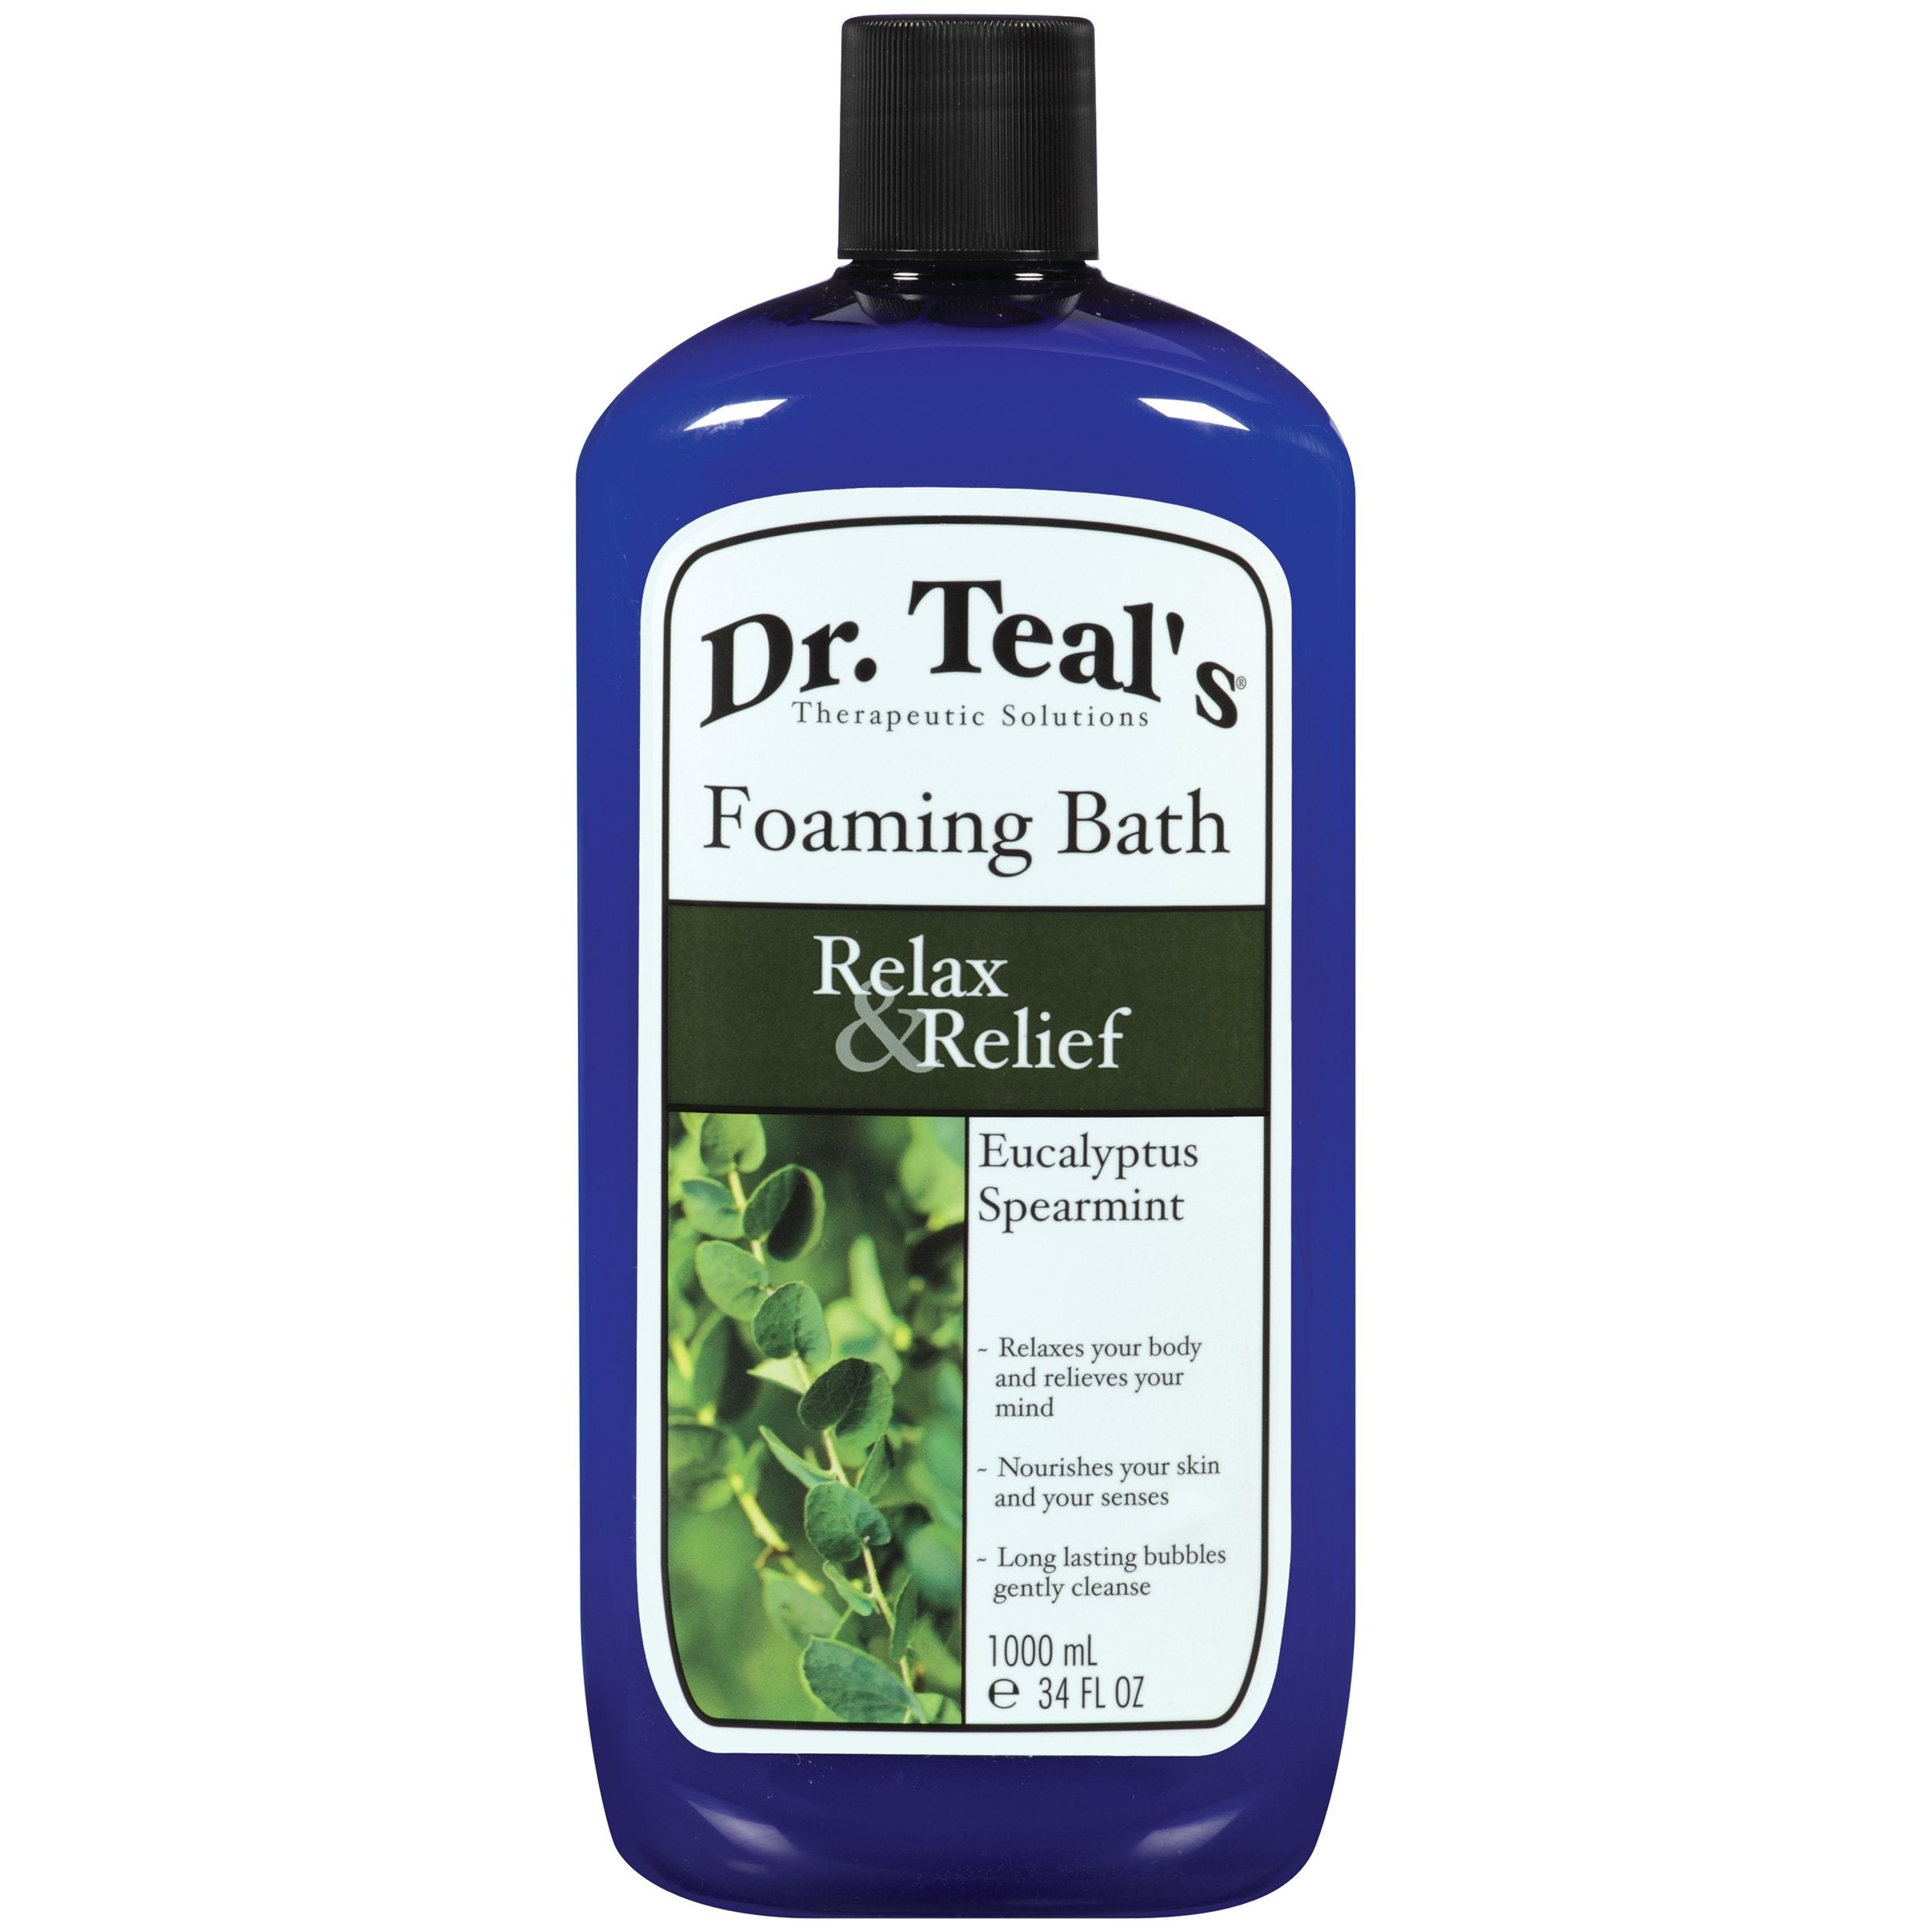 Dr Teal's Foaming Bath With Pure Epsom Salt, Relax & Relief With Eucalyptus & Spearmint, 34 Oz